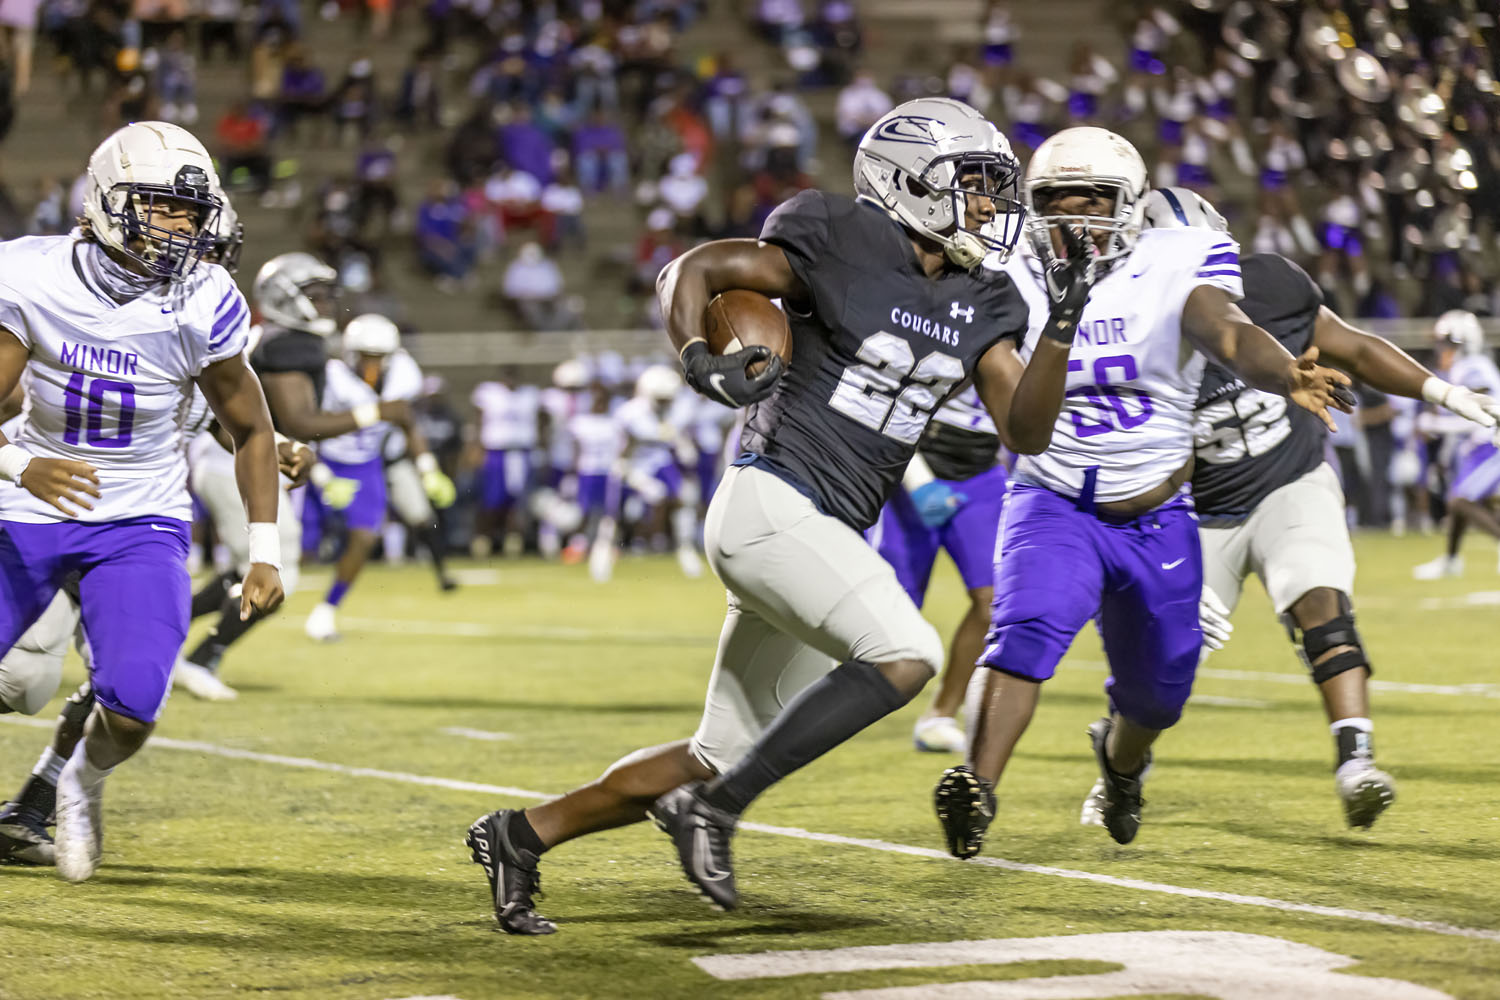 Clay-Chalkville voted No. 1 in latest ASWA football poll